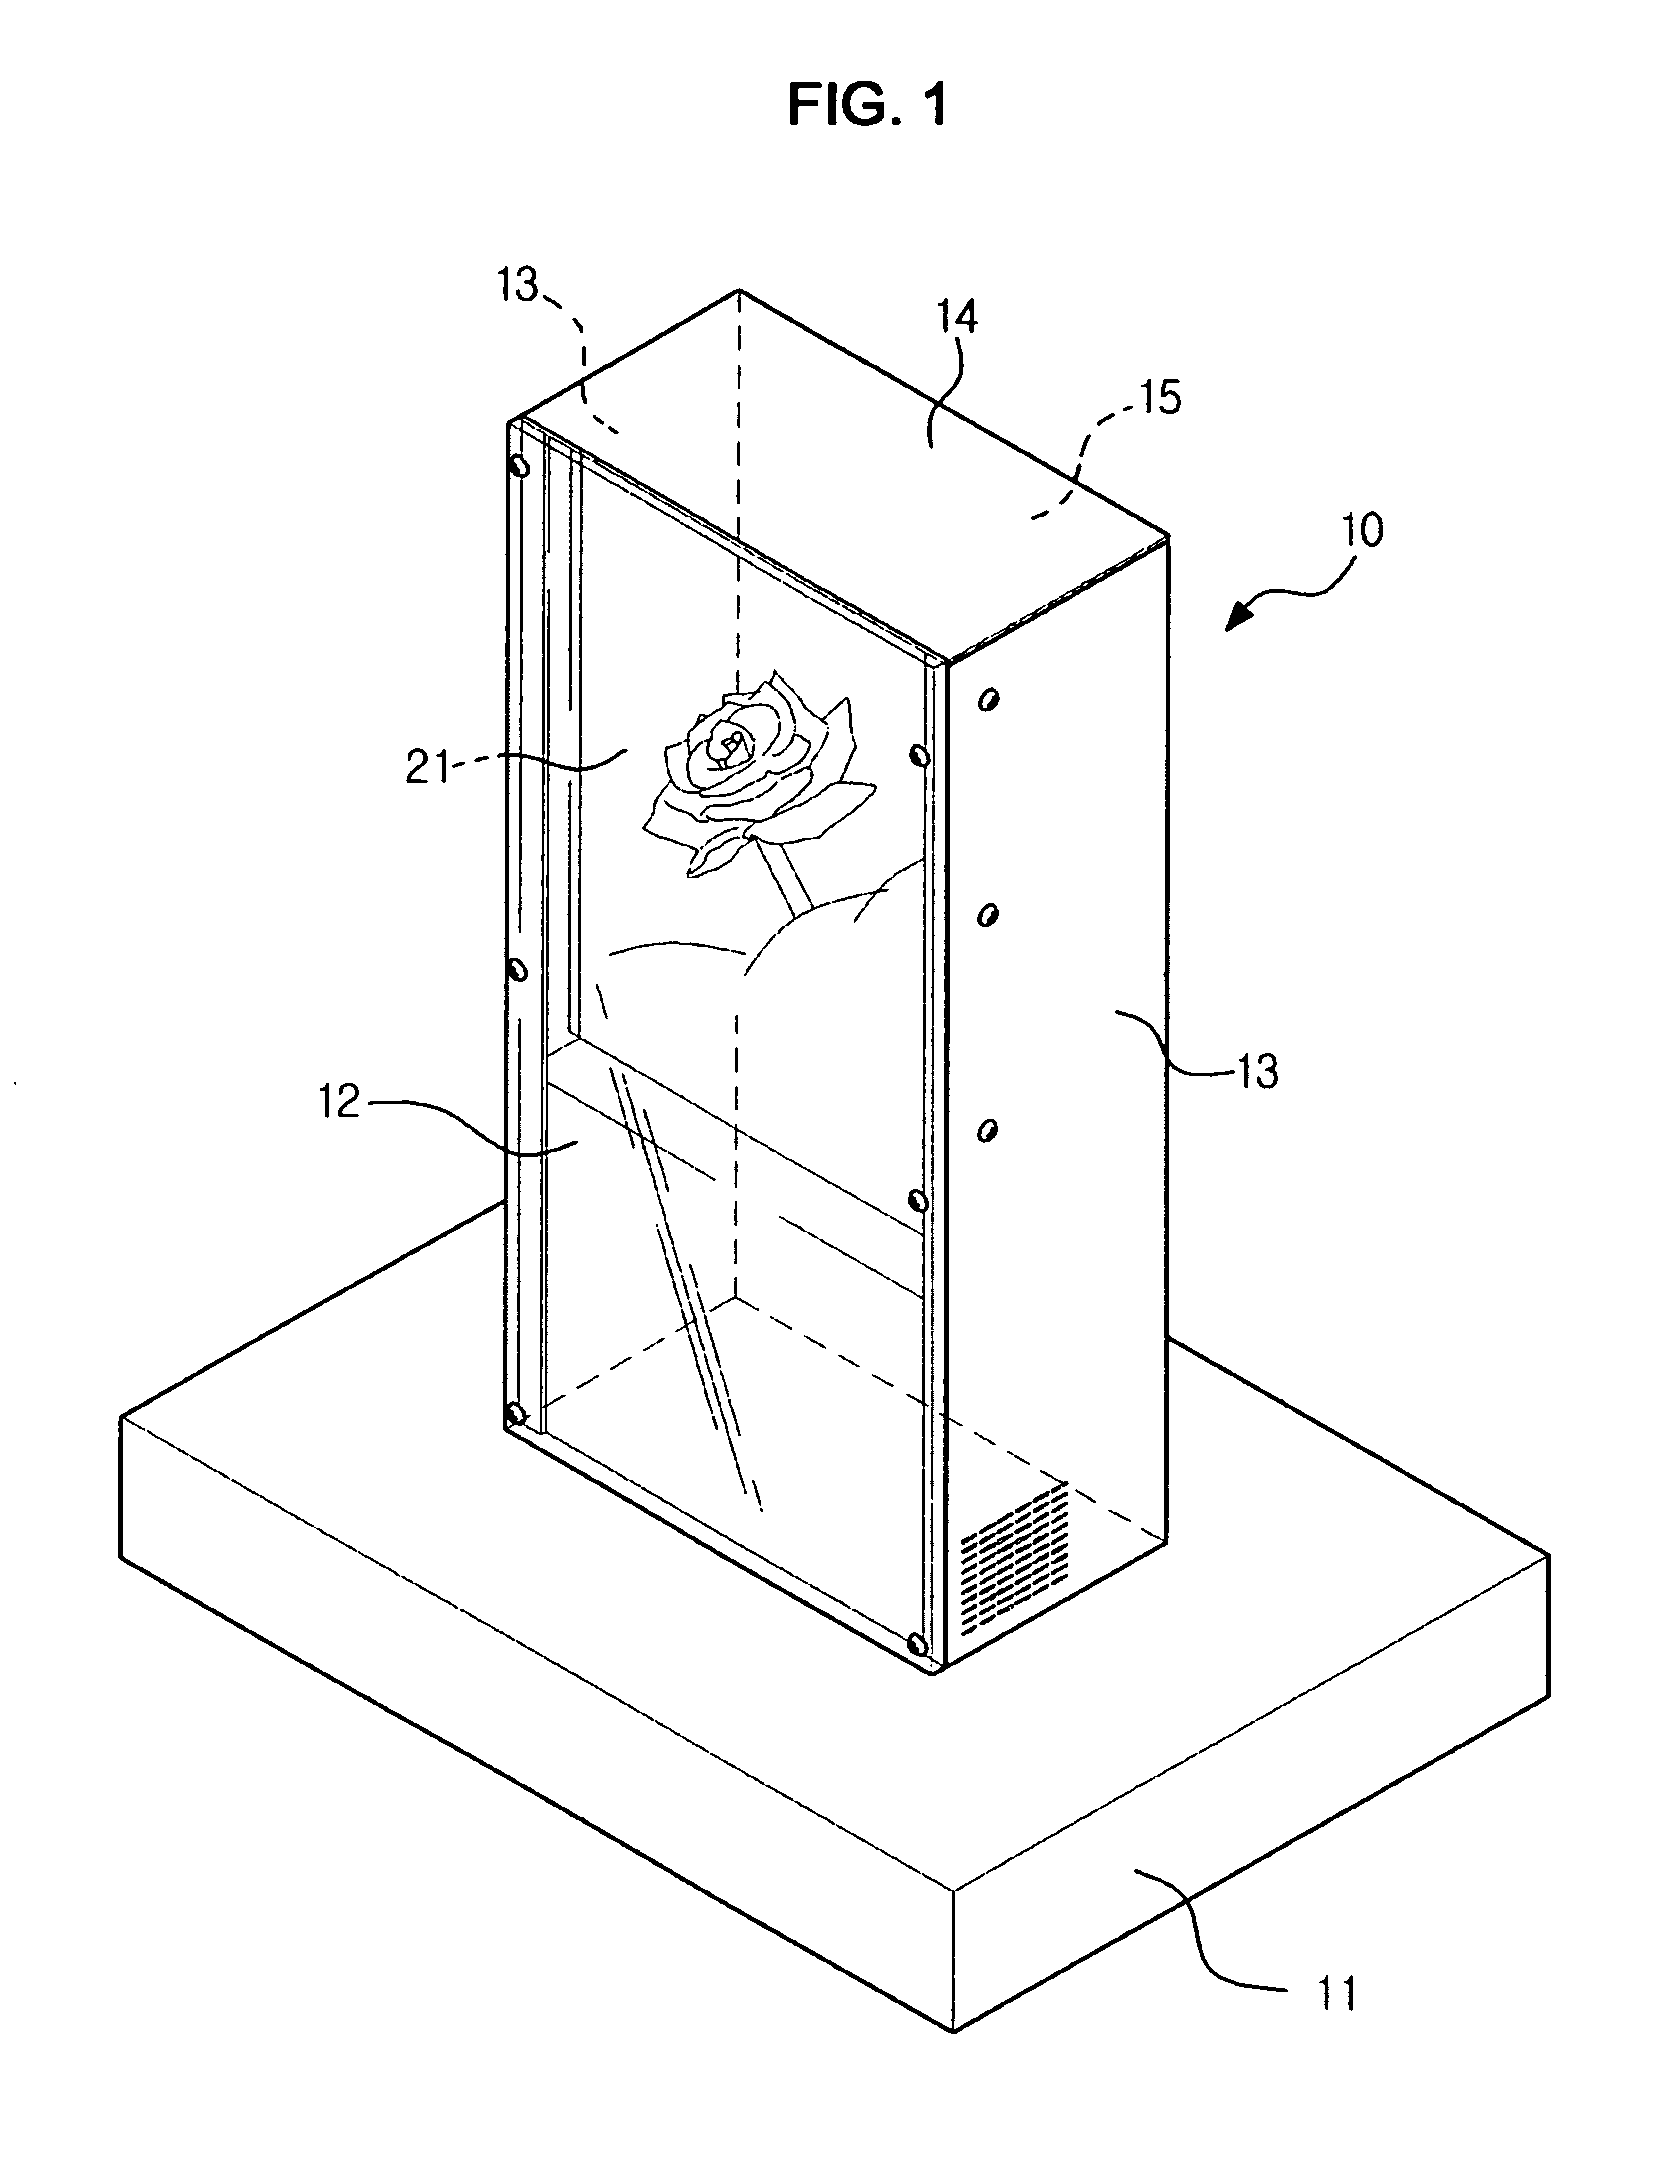 Liquid crystal display device including airflow channel